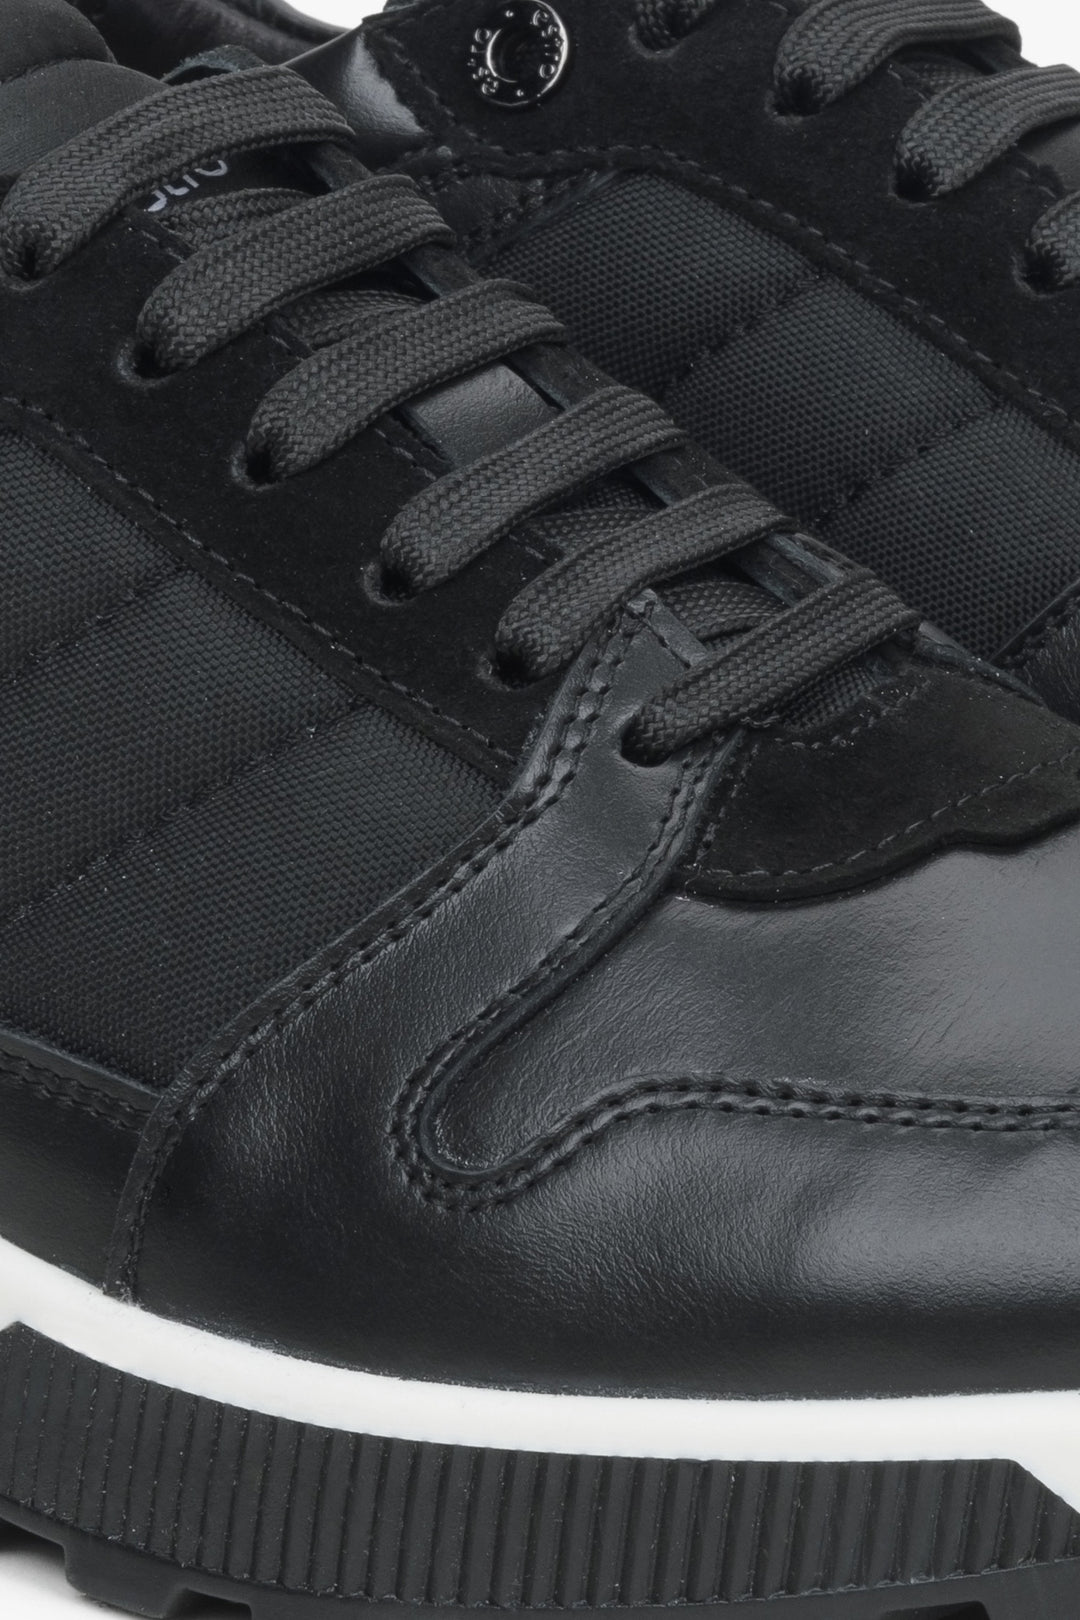 Men's black sneakers by Estro - close-up on the details.